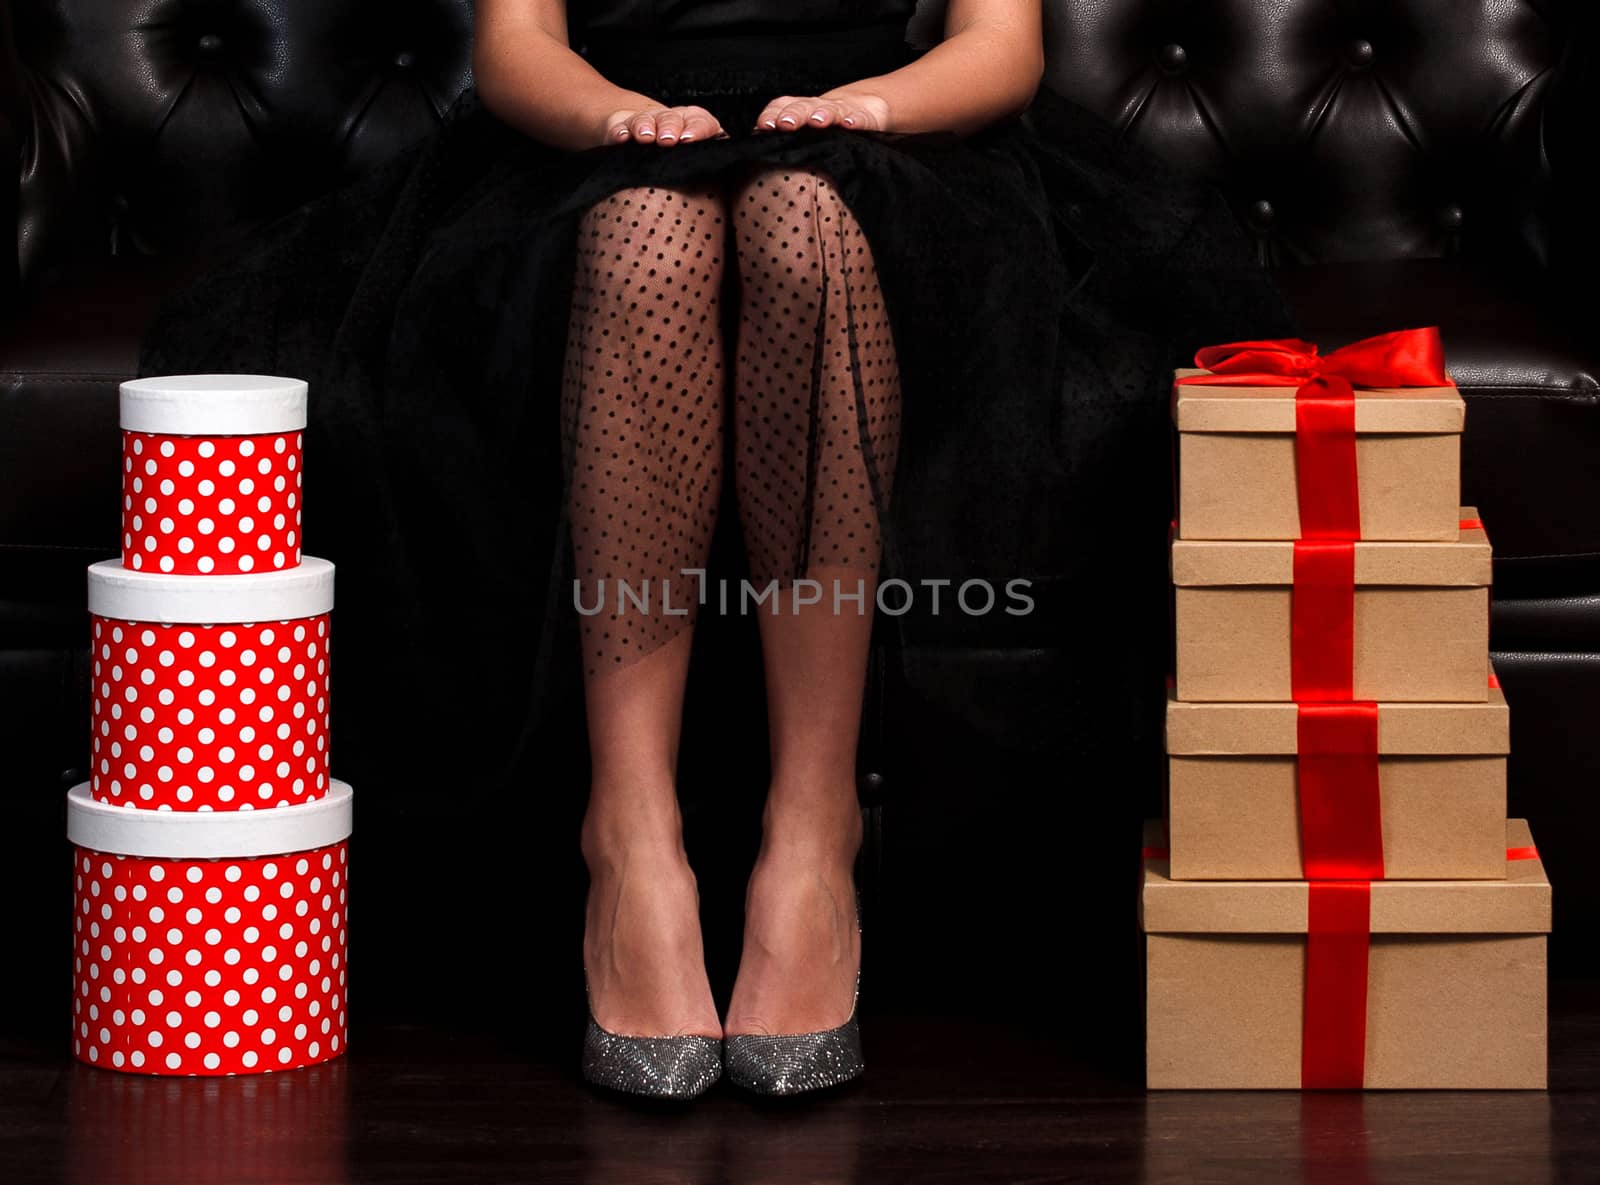 Pretty woman sittin on leather sofa between stacks of presents